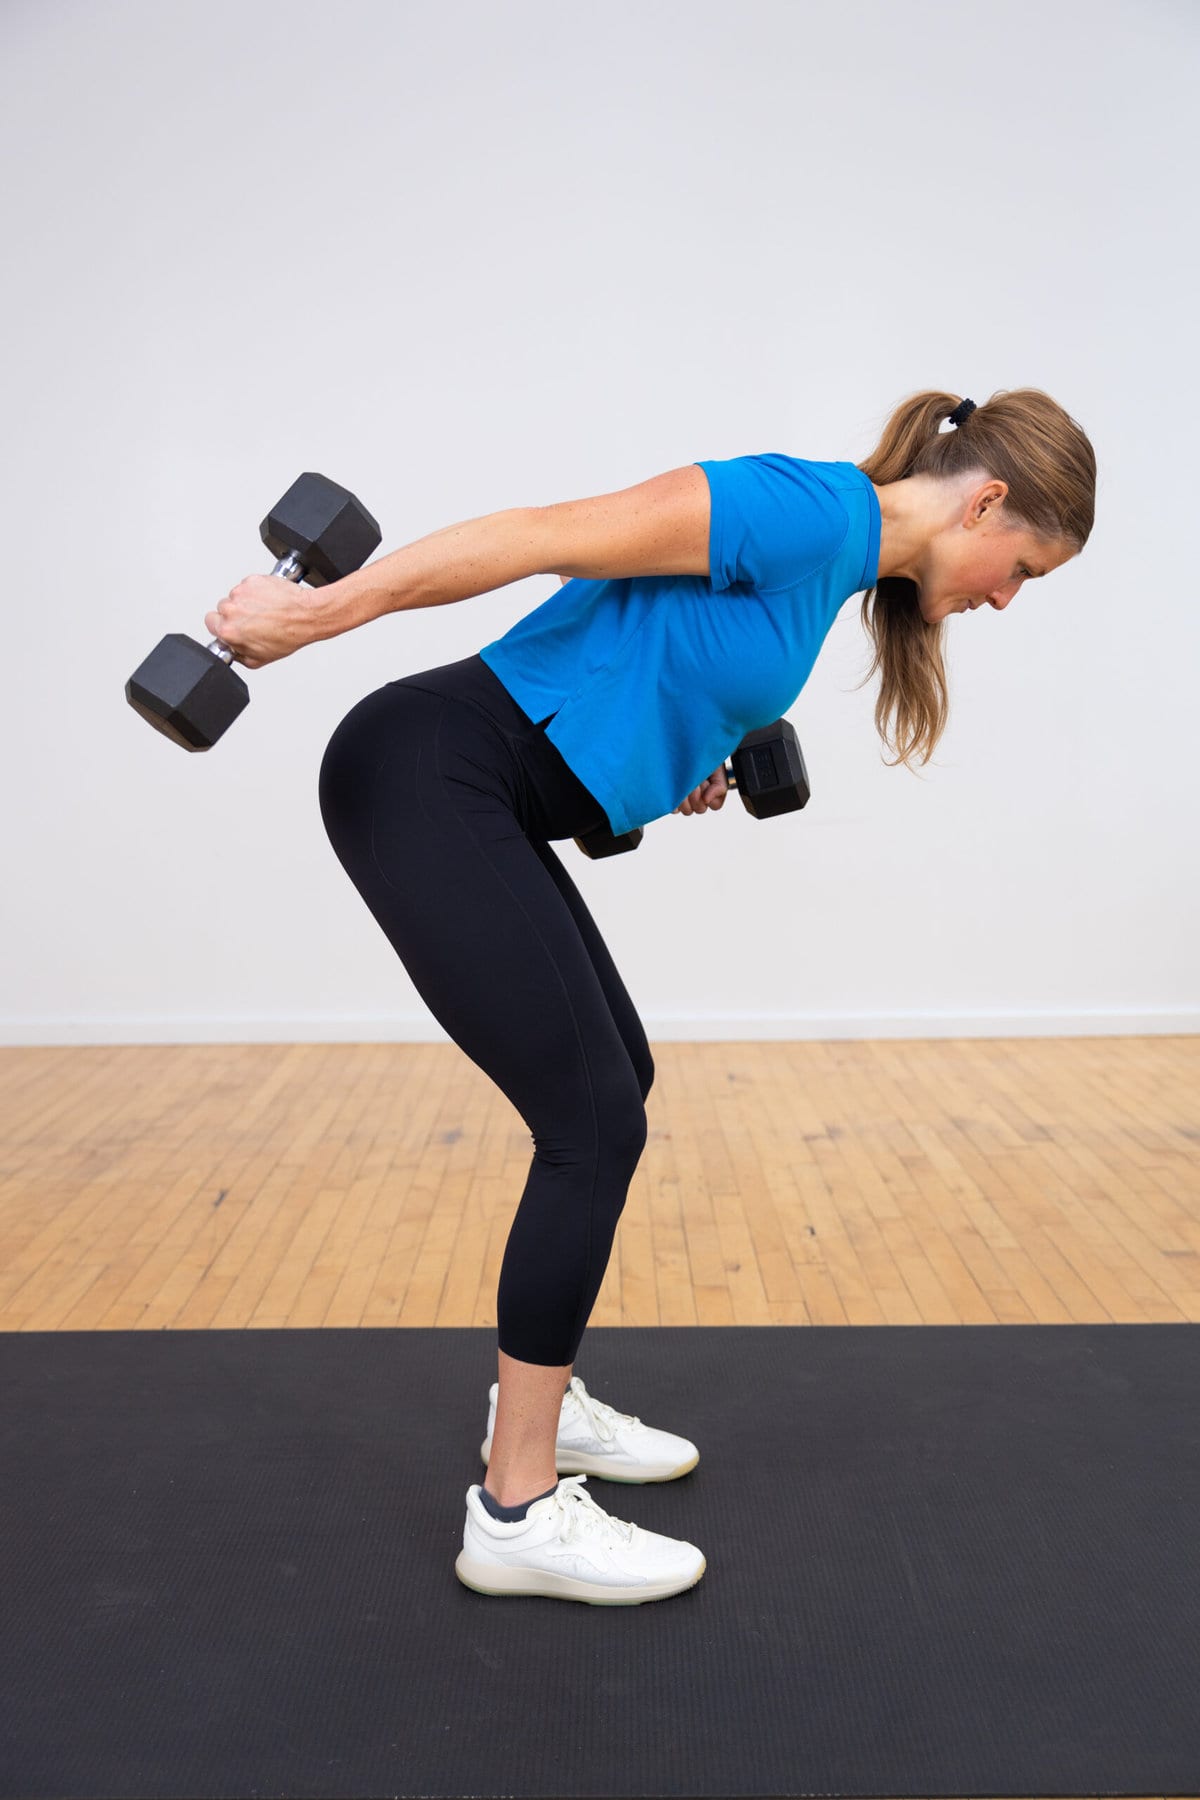 5 Upper Body Dumbbell Exercises to Tone Your Back! - Nourish, Move, Love